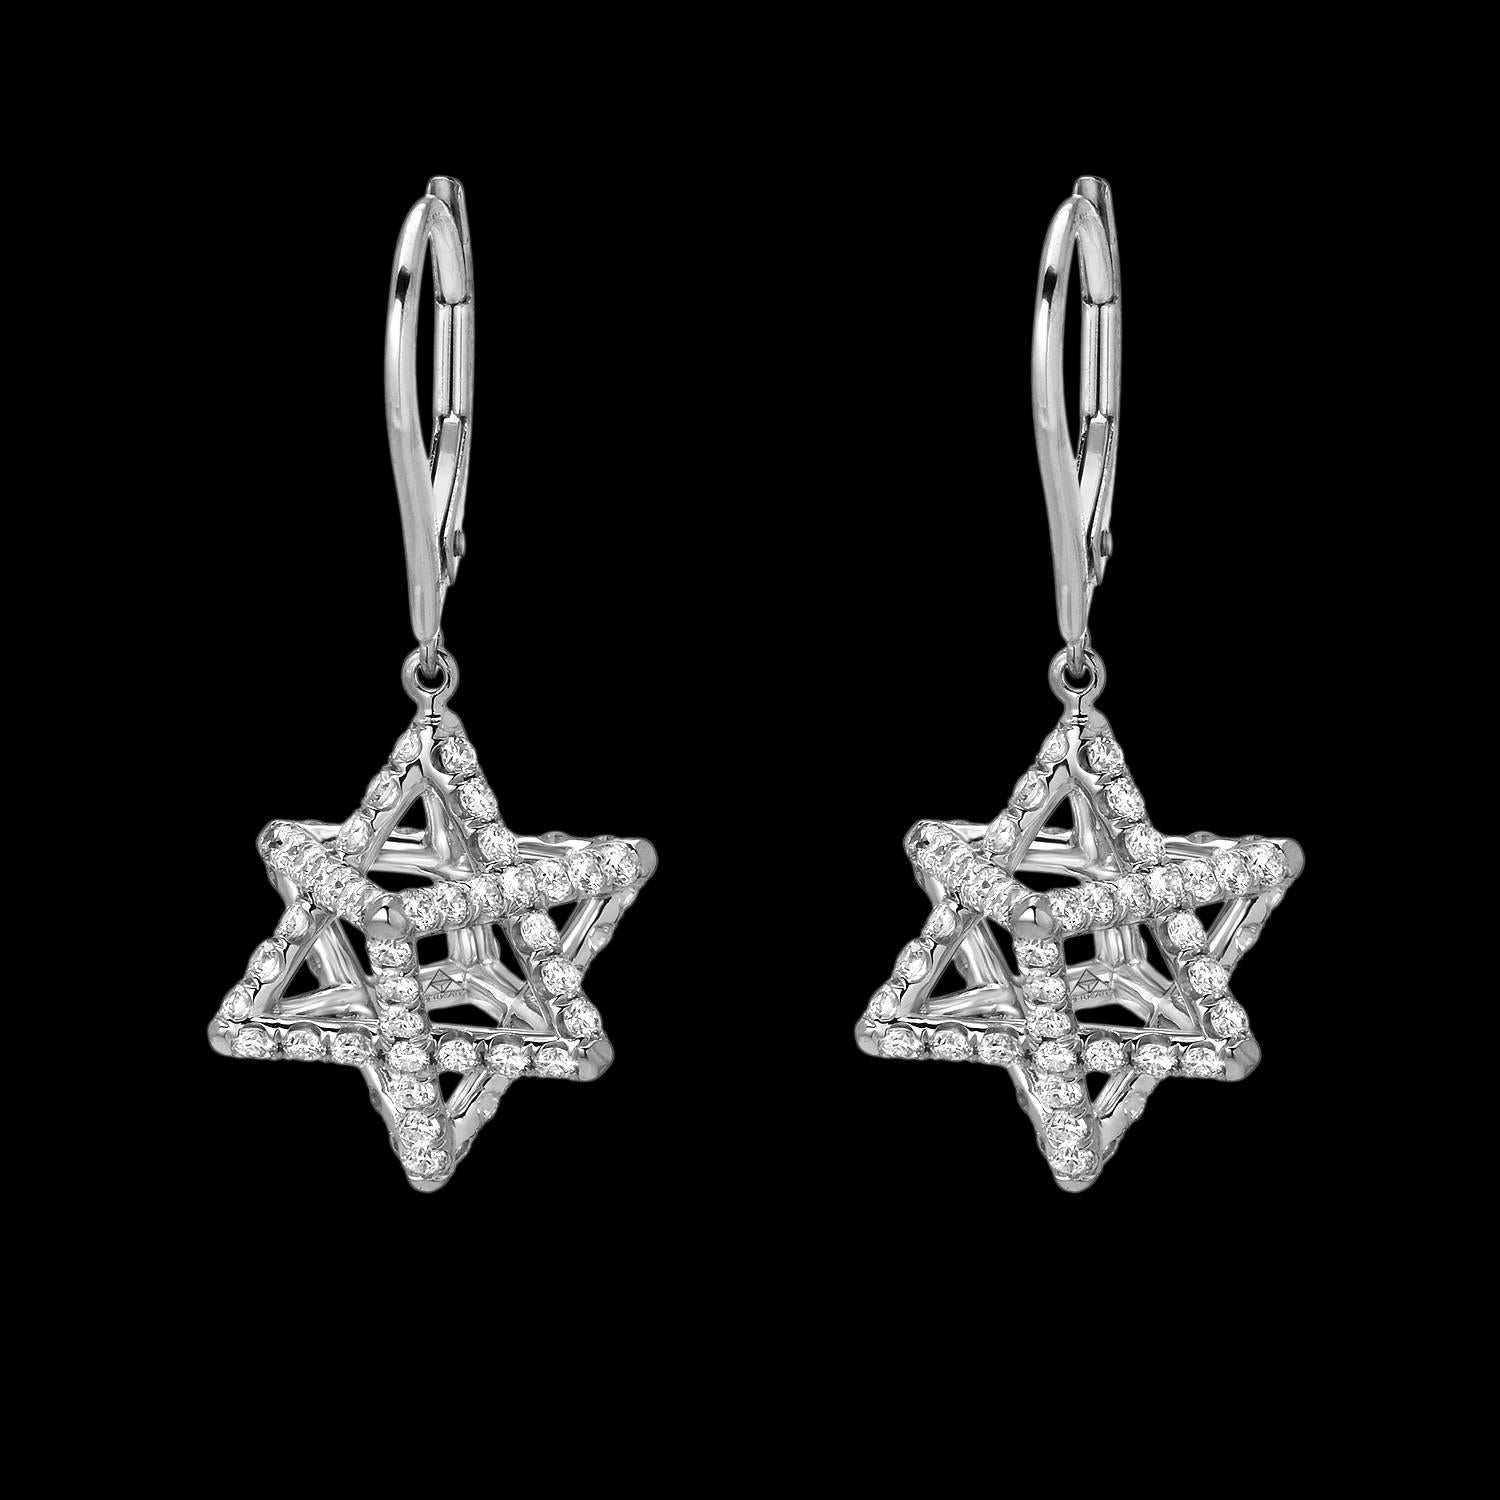 Merkaba platinum drop earrings feature a suspended diamond Merkaba star measuring 0.57 inches, set with a total of approximately 2.02 carats of round brilliant diamonds, F-G color and VVS2-VS1 clarity. These heirloom quality earrings, 1.1 inches in